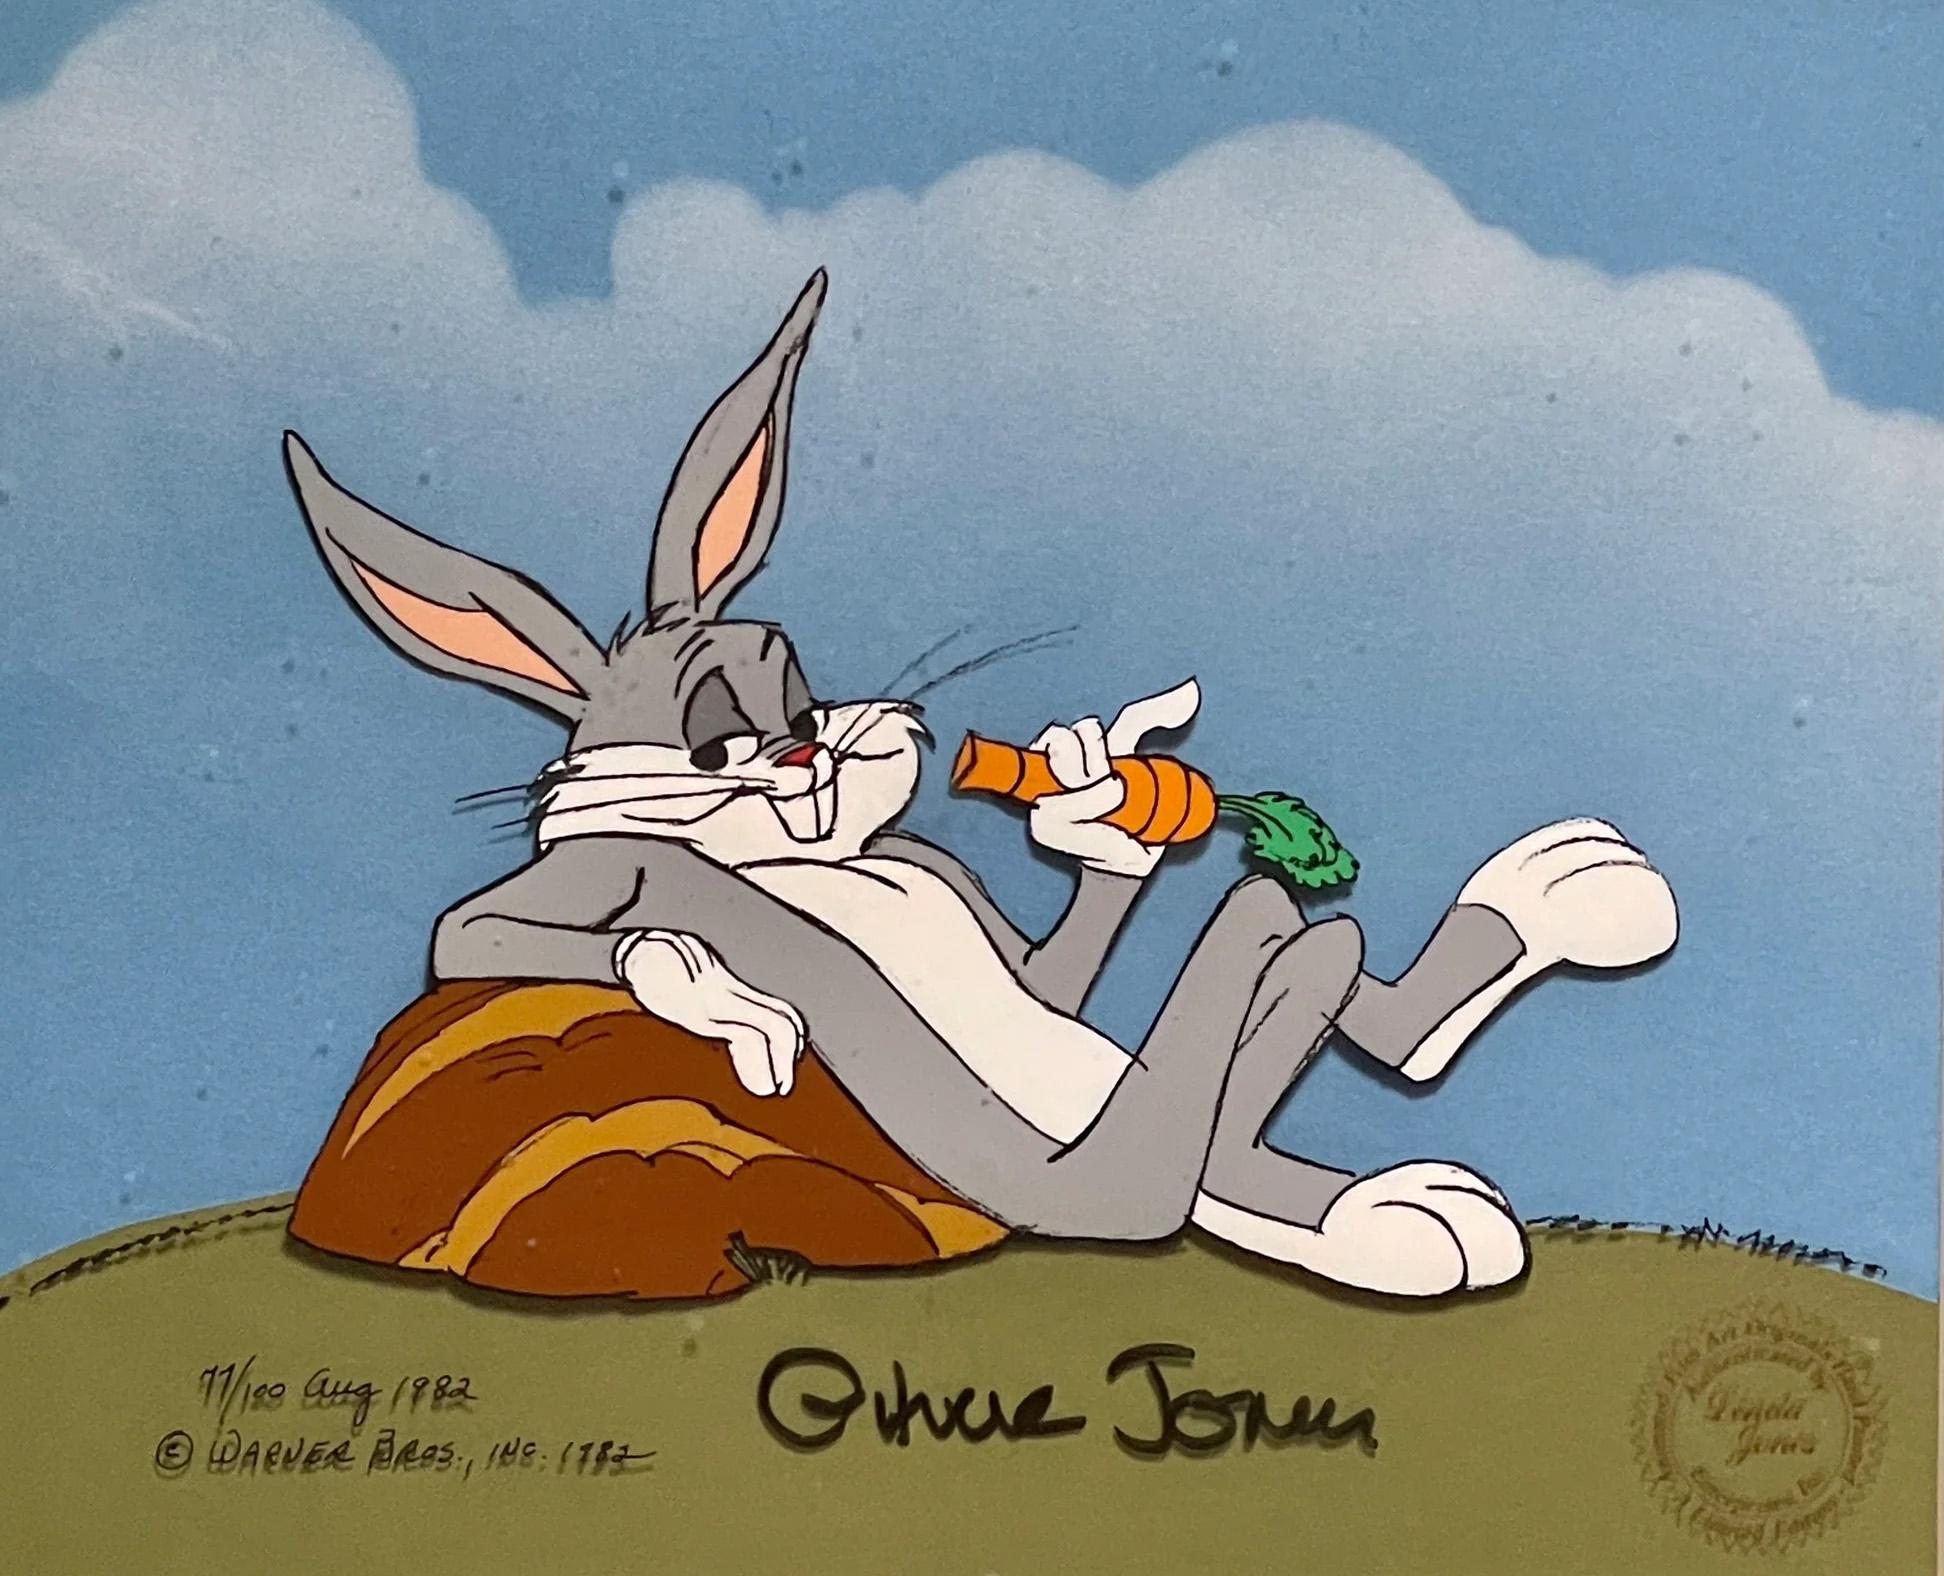 MEDIUM: Limited Edition Cel
IMAGE SIZE: 12 Field
EDITION SIZE: 100
SKU: CCV2740

Framing included in price.

ABOUT THE IMAGE: This cel is hand-signed by Chuck Jones and is numbered 77/100.